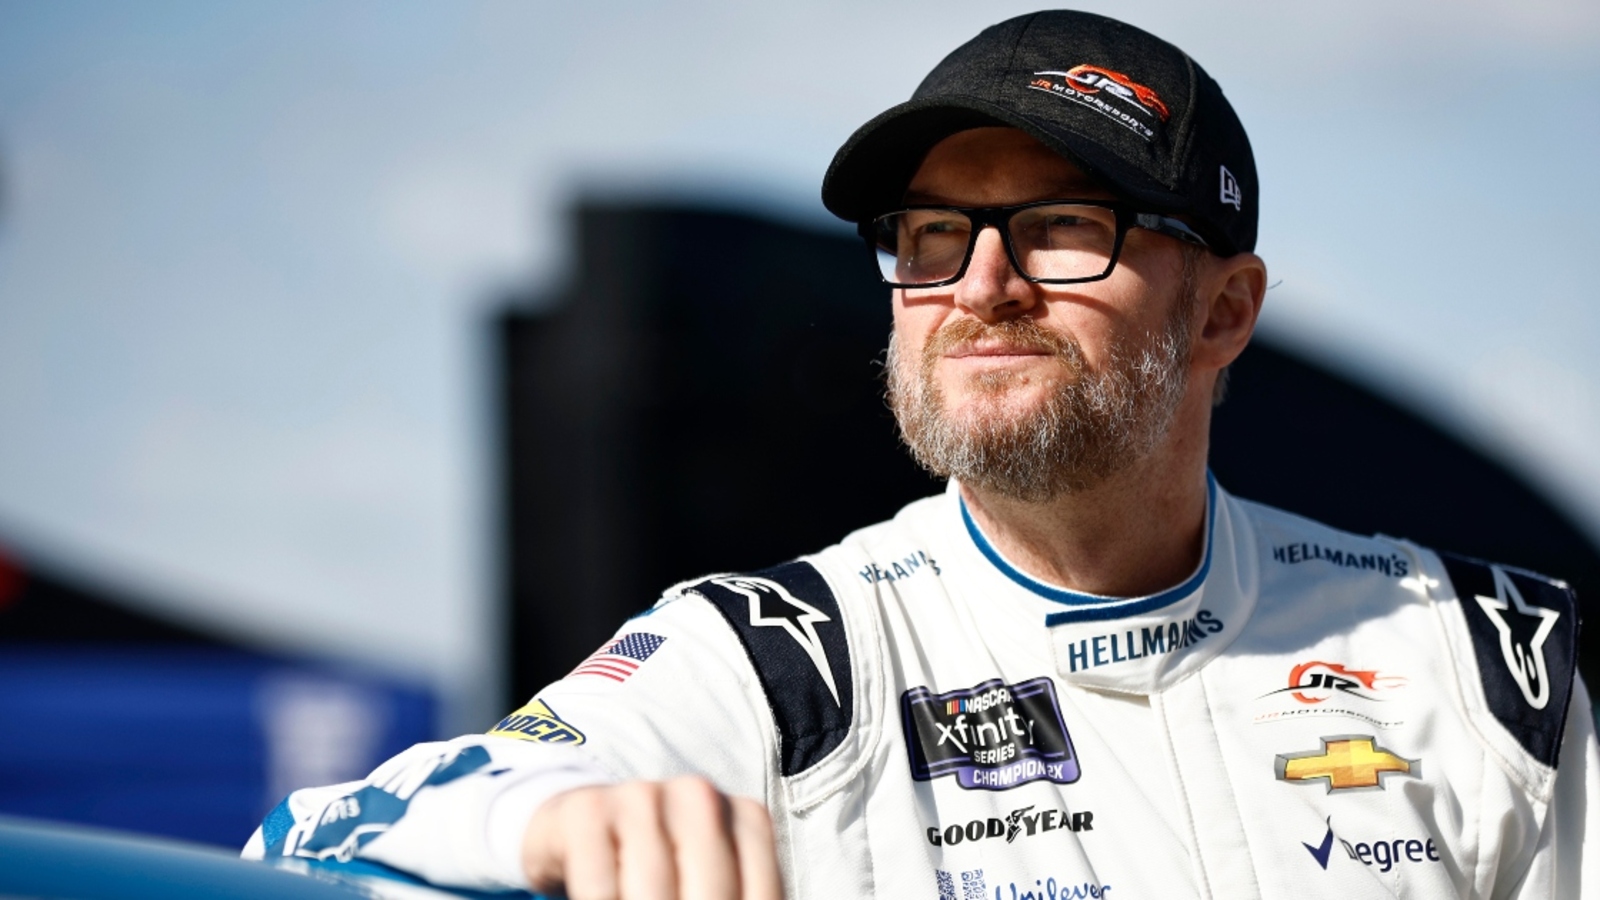 Dale Earnhardt Jr. explains how tracks are using iRacing to make improvements